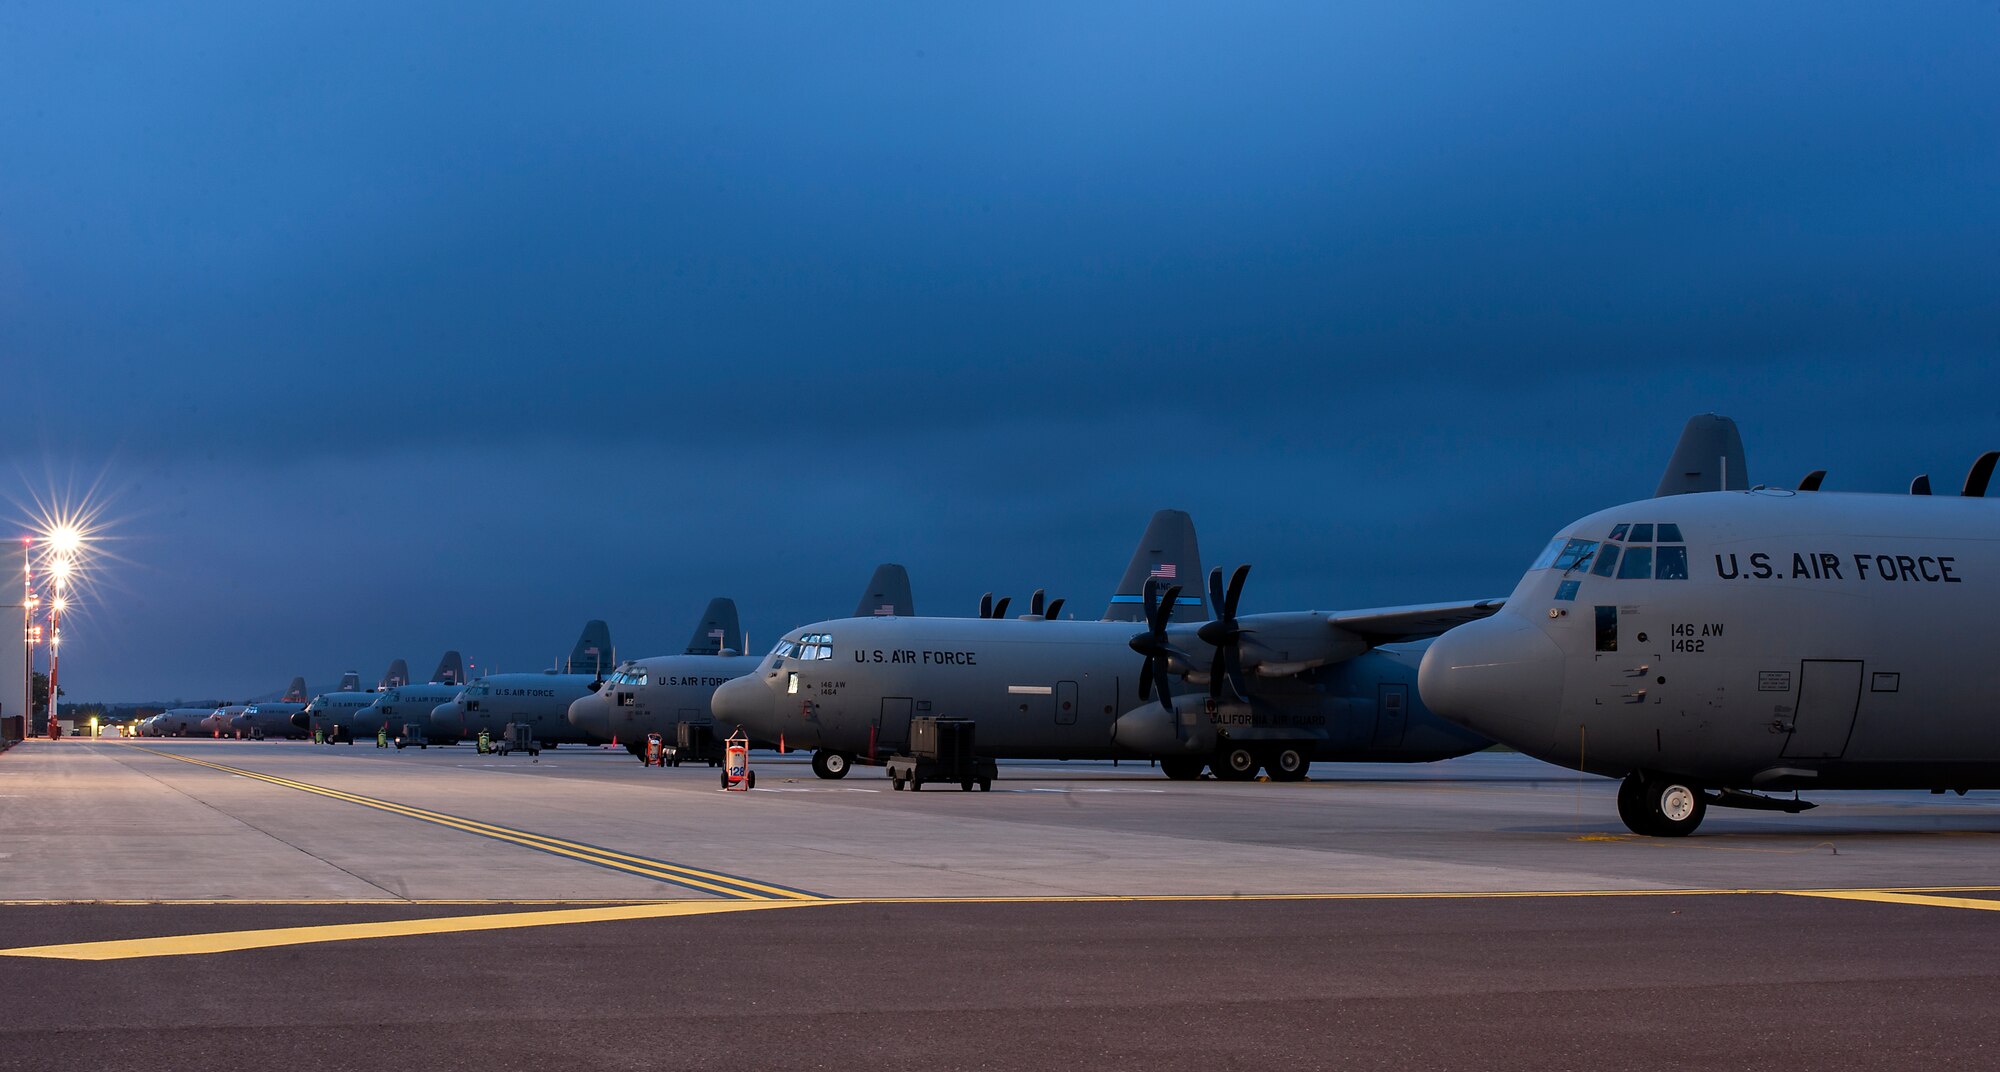 Aircraft with the Air National Guard and the 37th Airlift Squadron sit on the flightline in support of Steadfast Javilen II at Ramstein Air Base, Germany, Sept. 2, 2014. The U.S. Air Force and Air National Guard support Steadfast Javelin II by providing personnel air drop and air landings in support of forcible entry and force projection, reinforcing the joint commitment to Operation Atlantic Resolve, and a  demonstrated commitment to our NATO allies and security in Eastern Europe. (U.S. Air Force photo/Senior Airman Damon Kasberg)